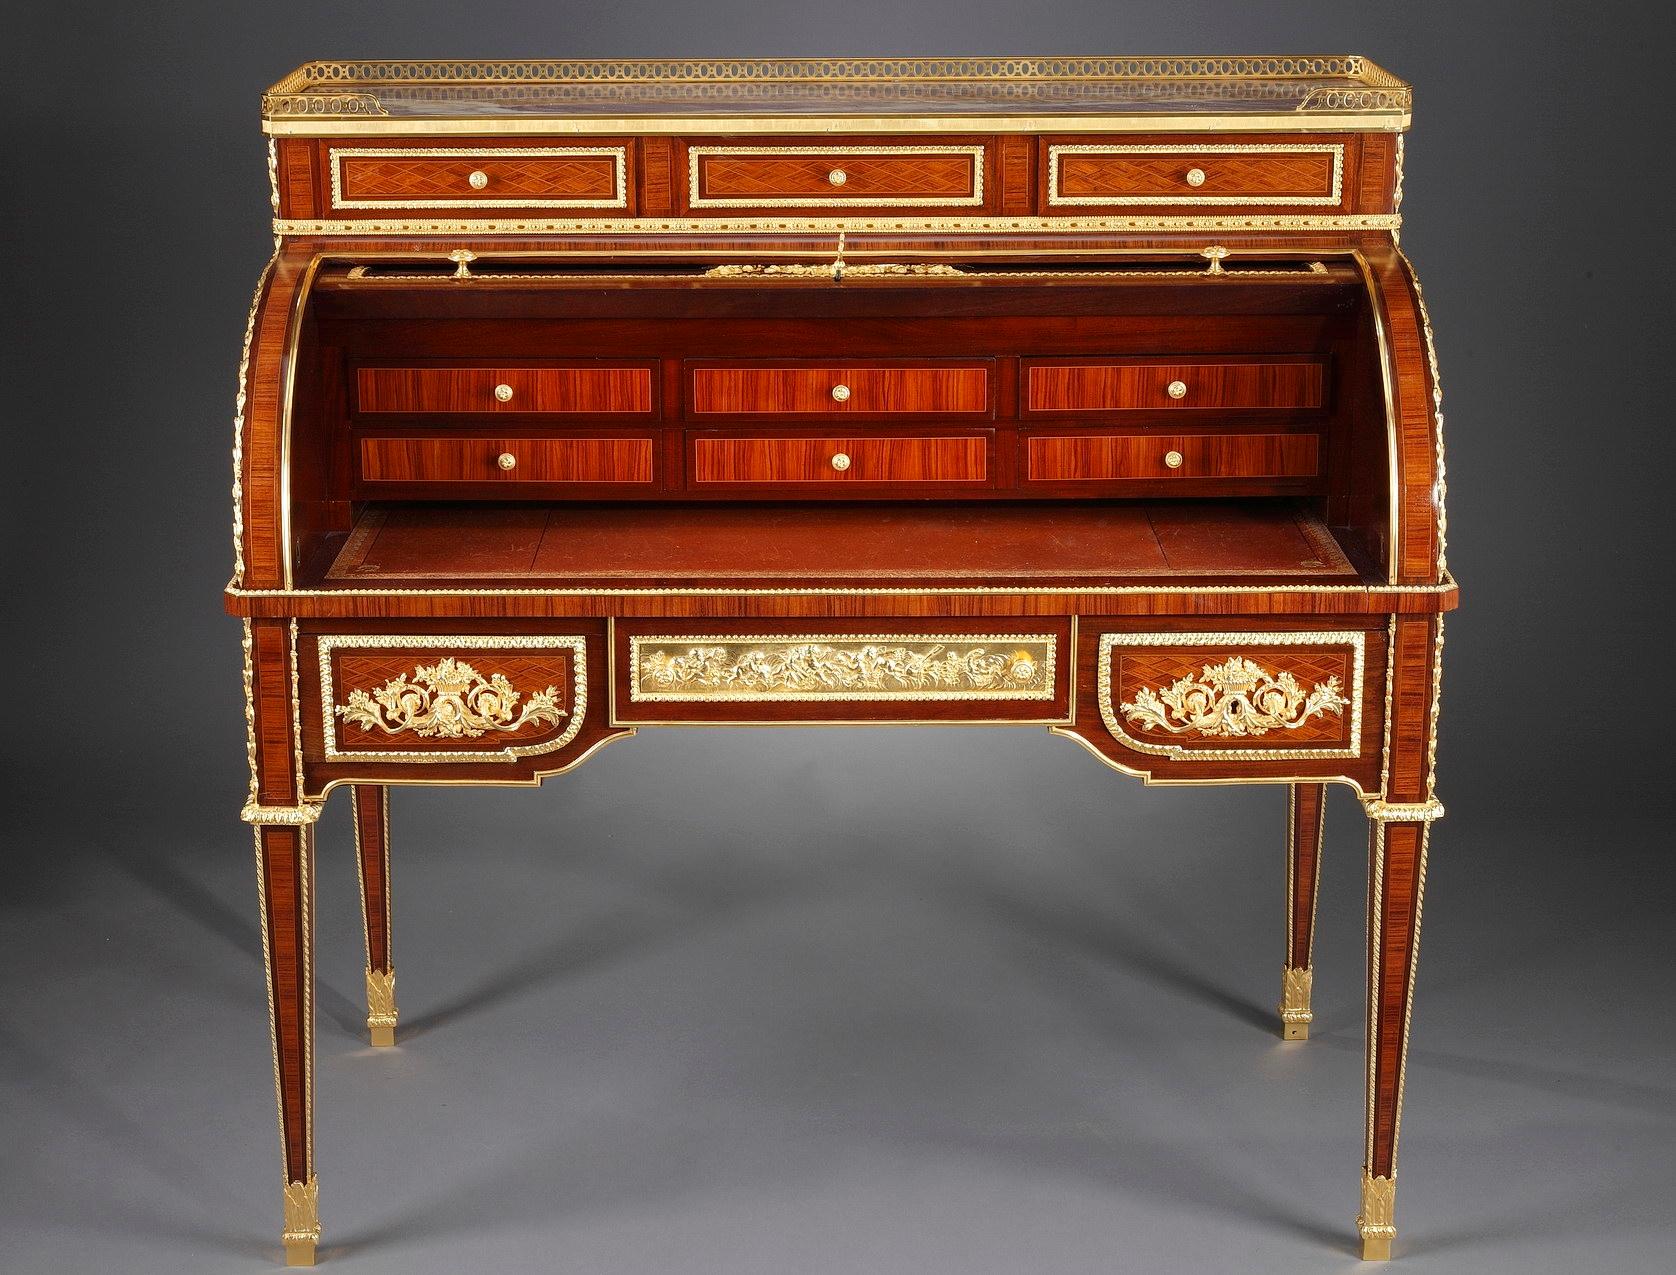 Louis XVI Rolltop Desk after Jean-Henri Riesener Attributed to Maison Beurdeley For Sale